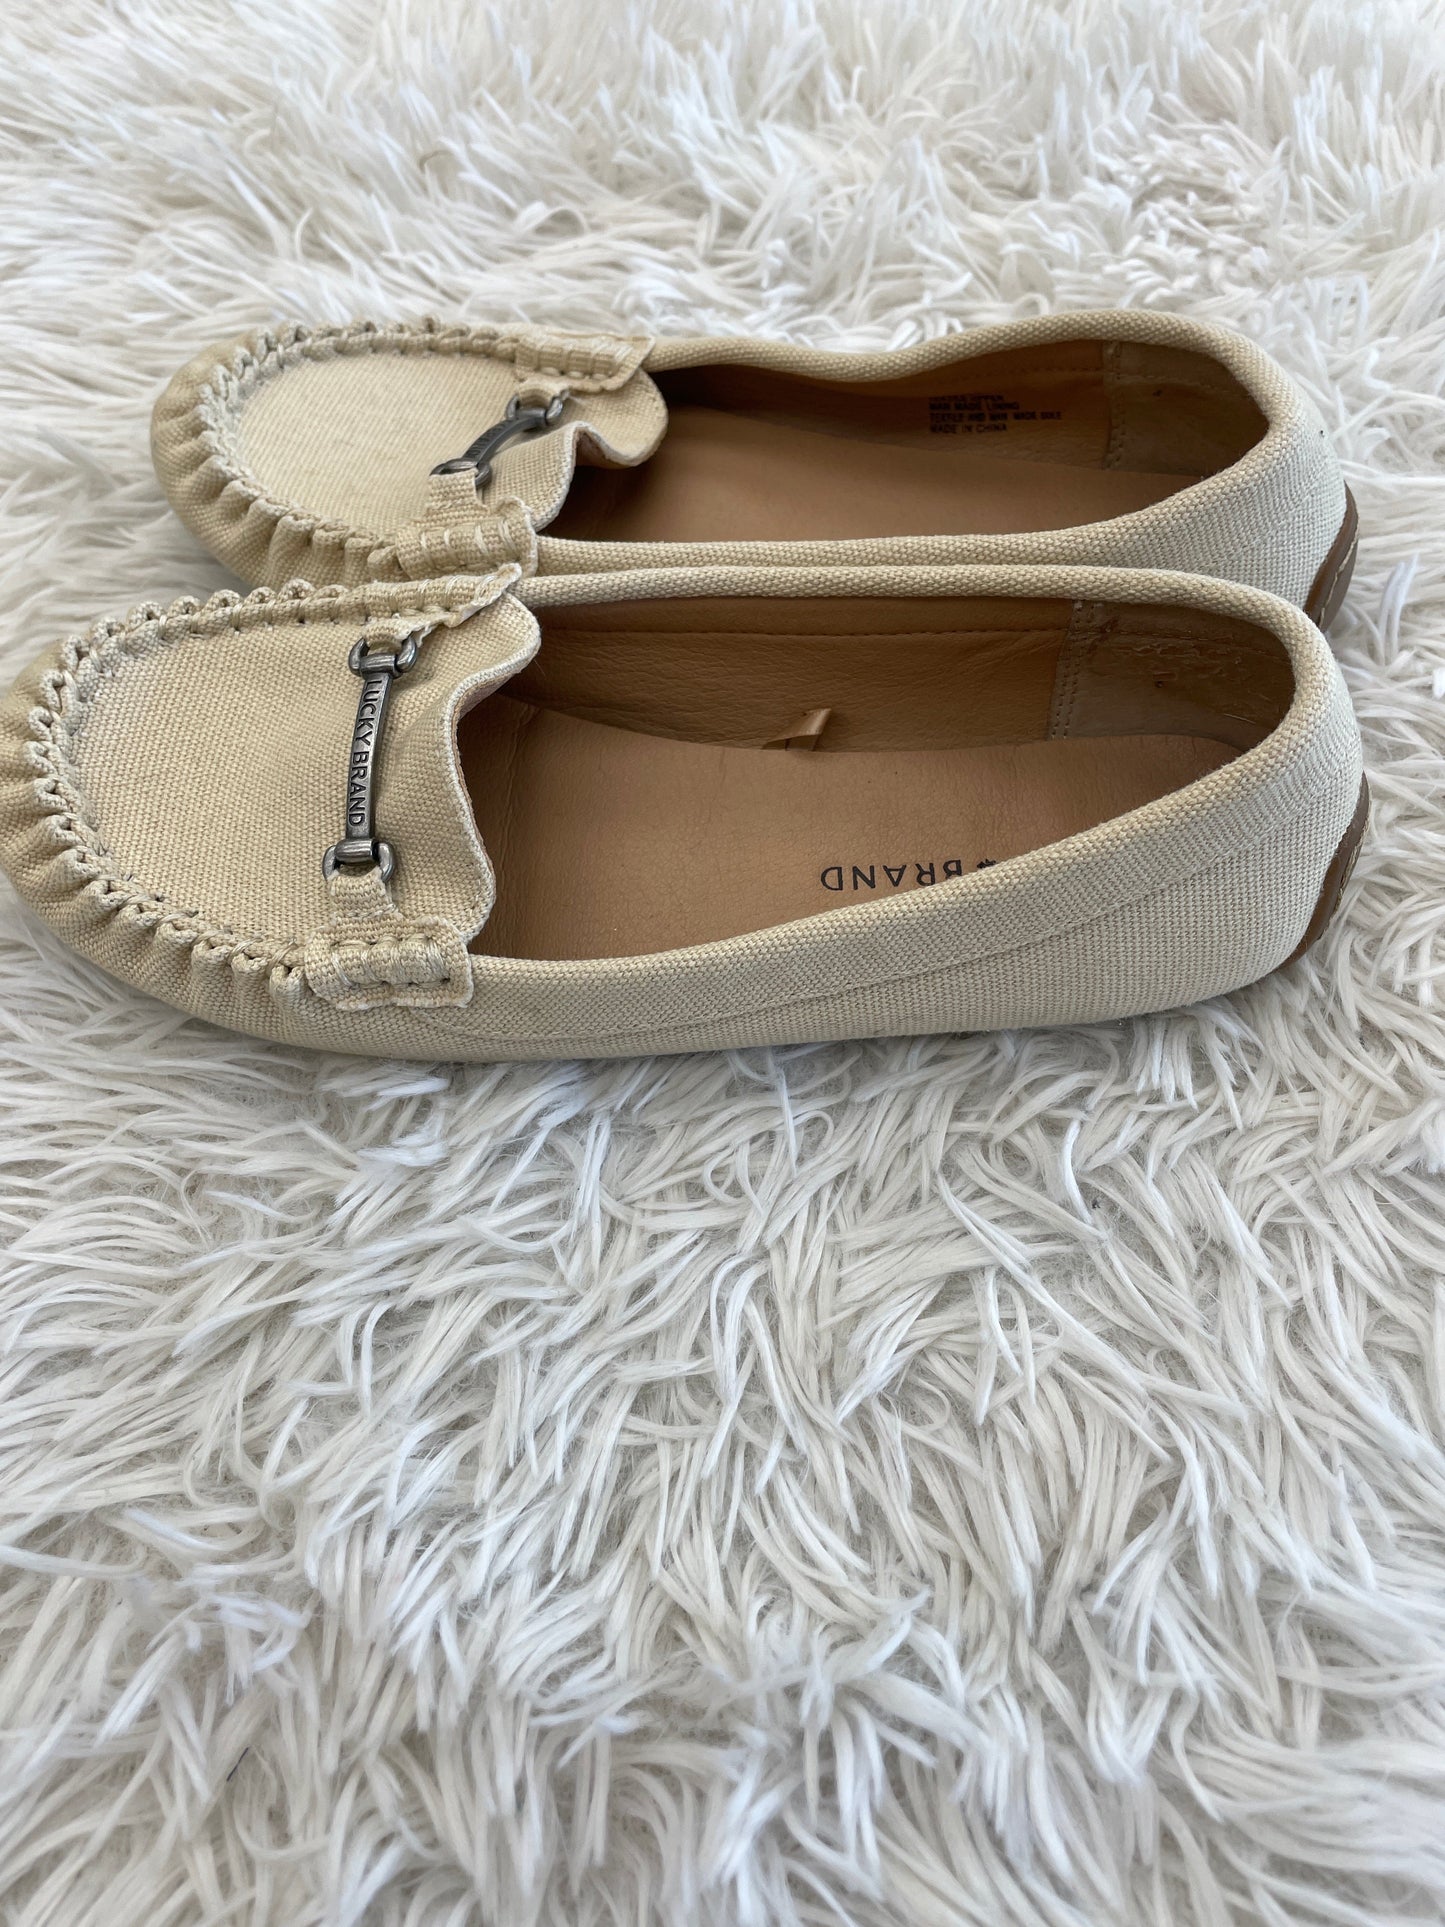 Ivory Shoes Flats Moccasin Lucky Brand, Size 7